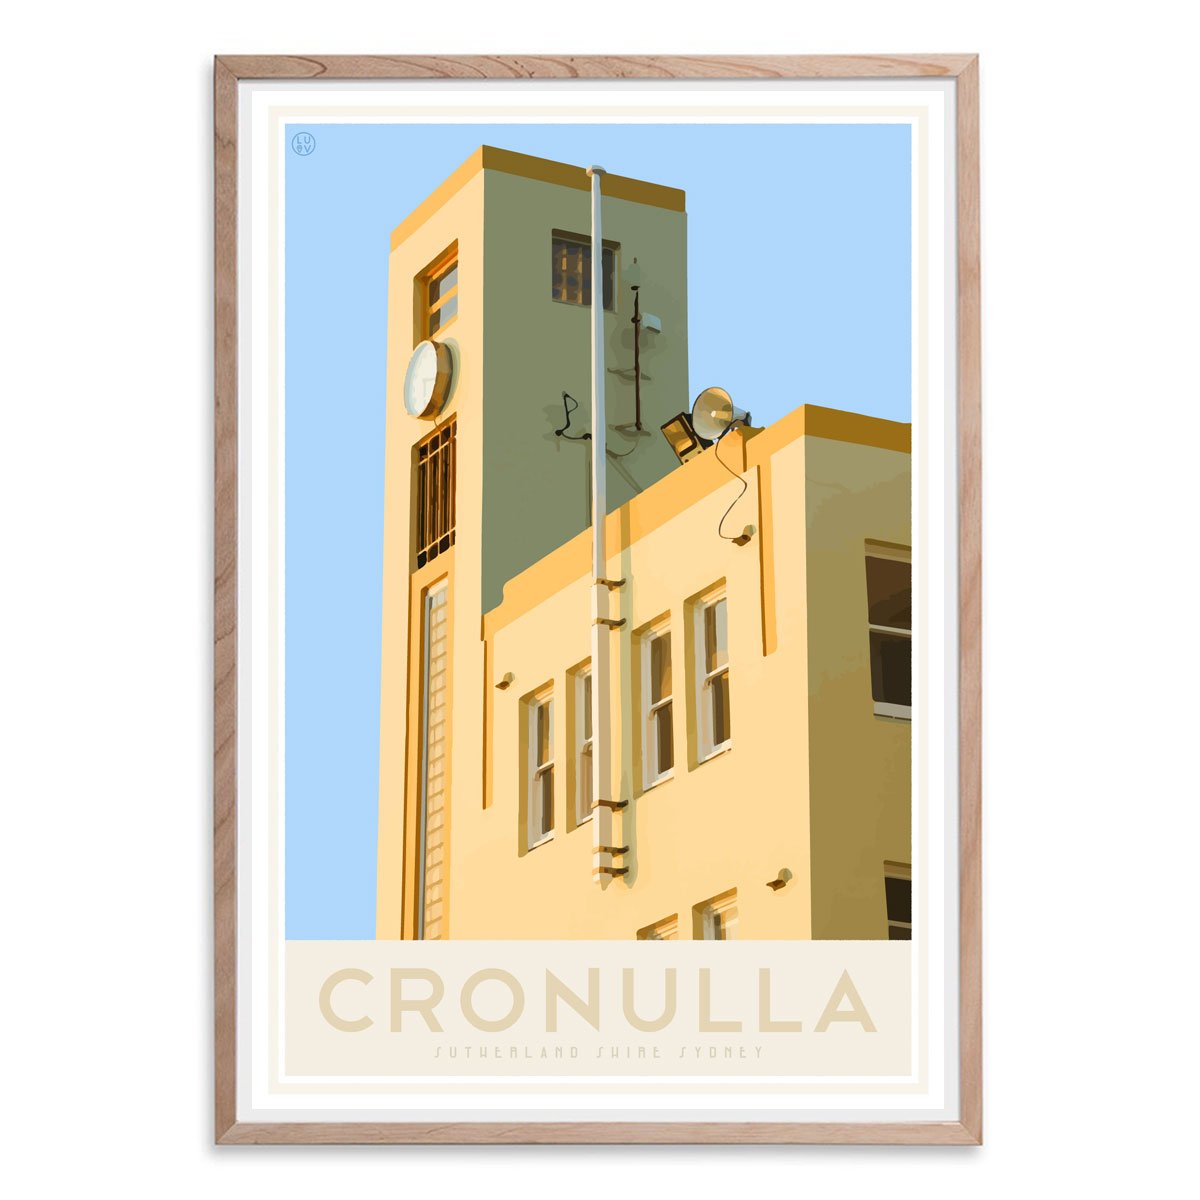 Cronulla Beach vintage travel style oak framed print, designed by places we luv